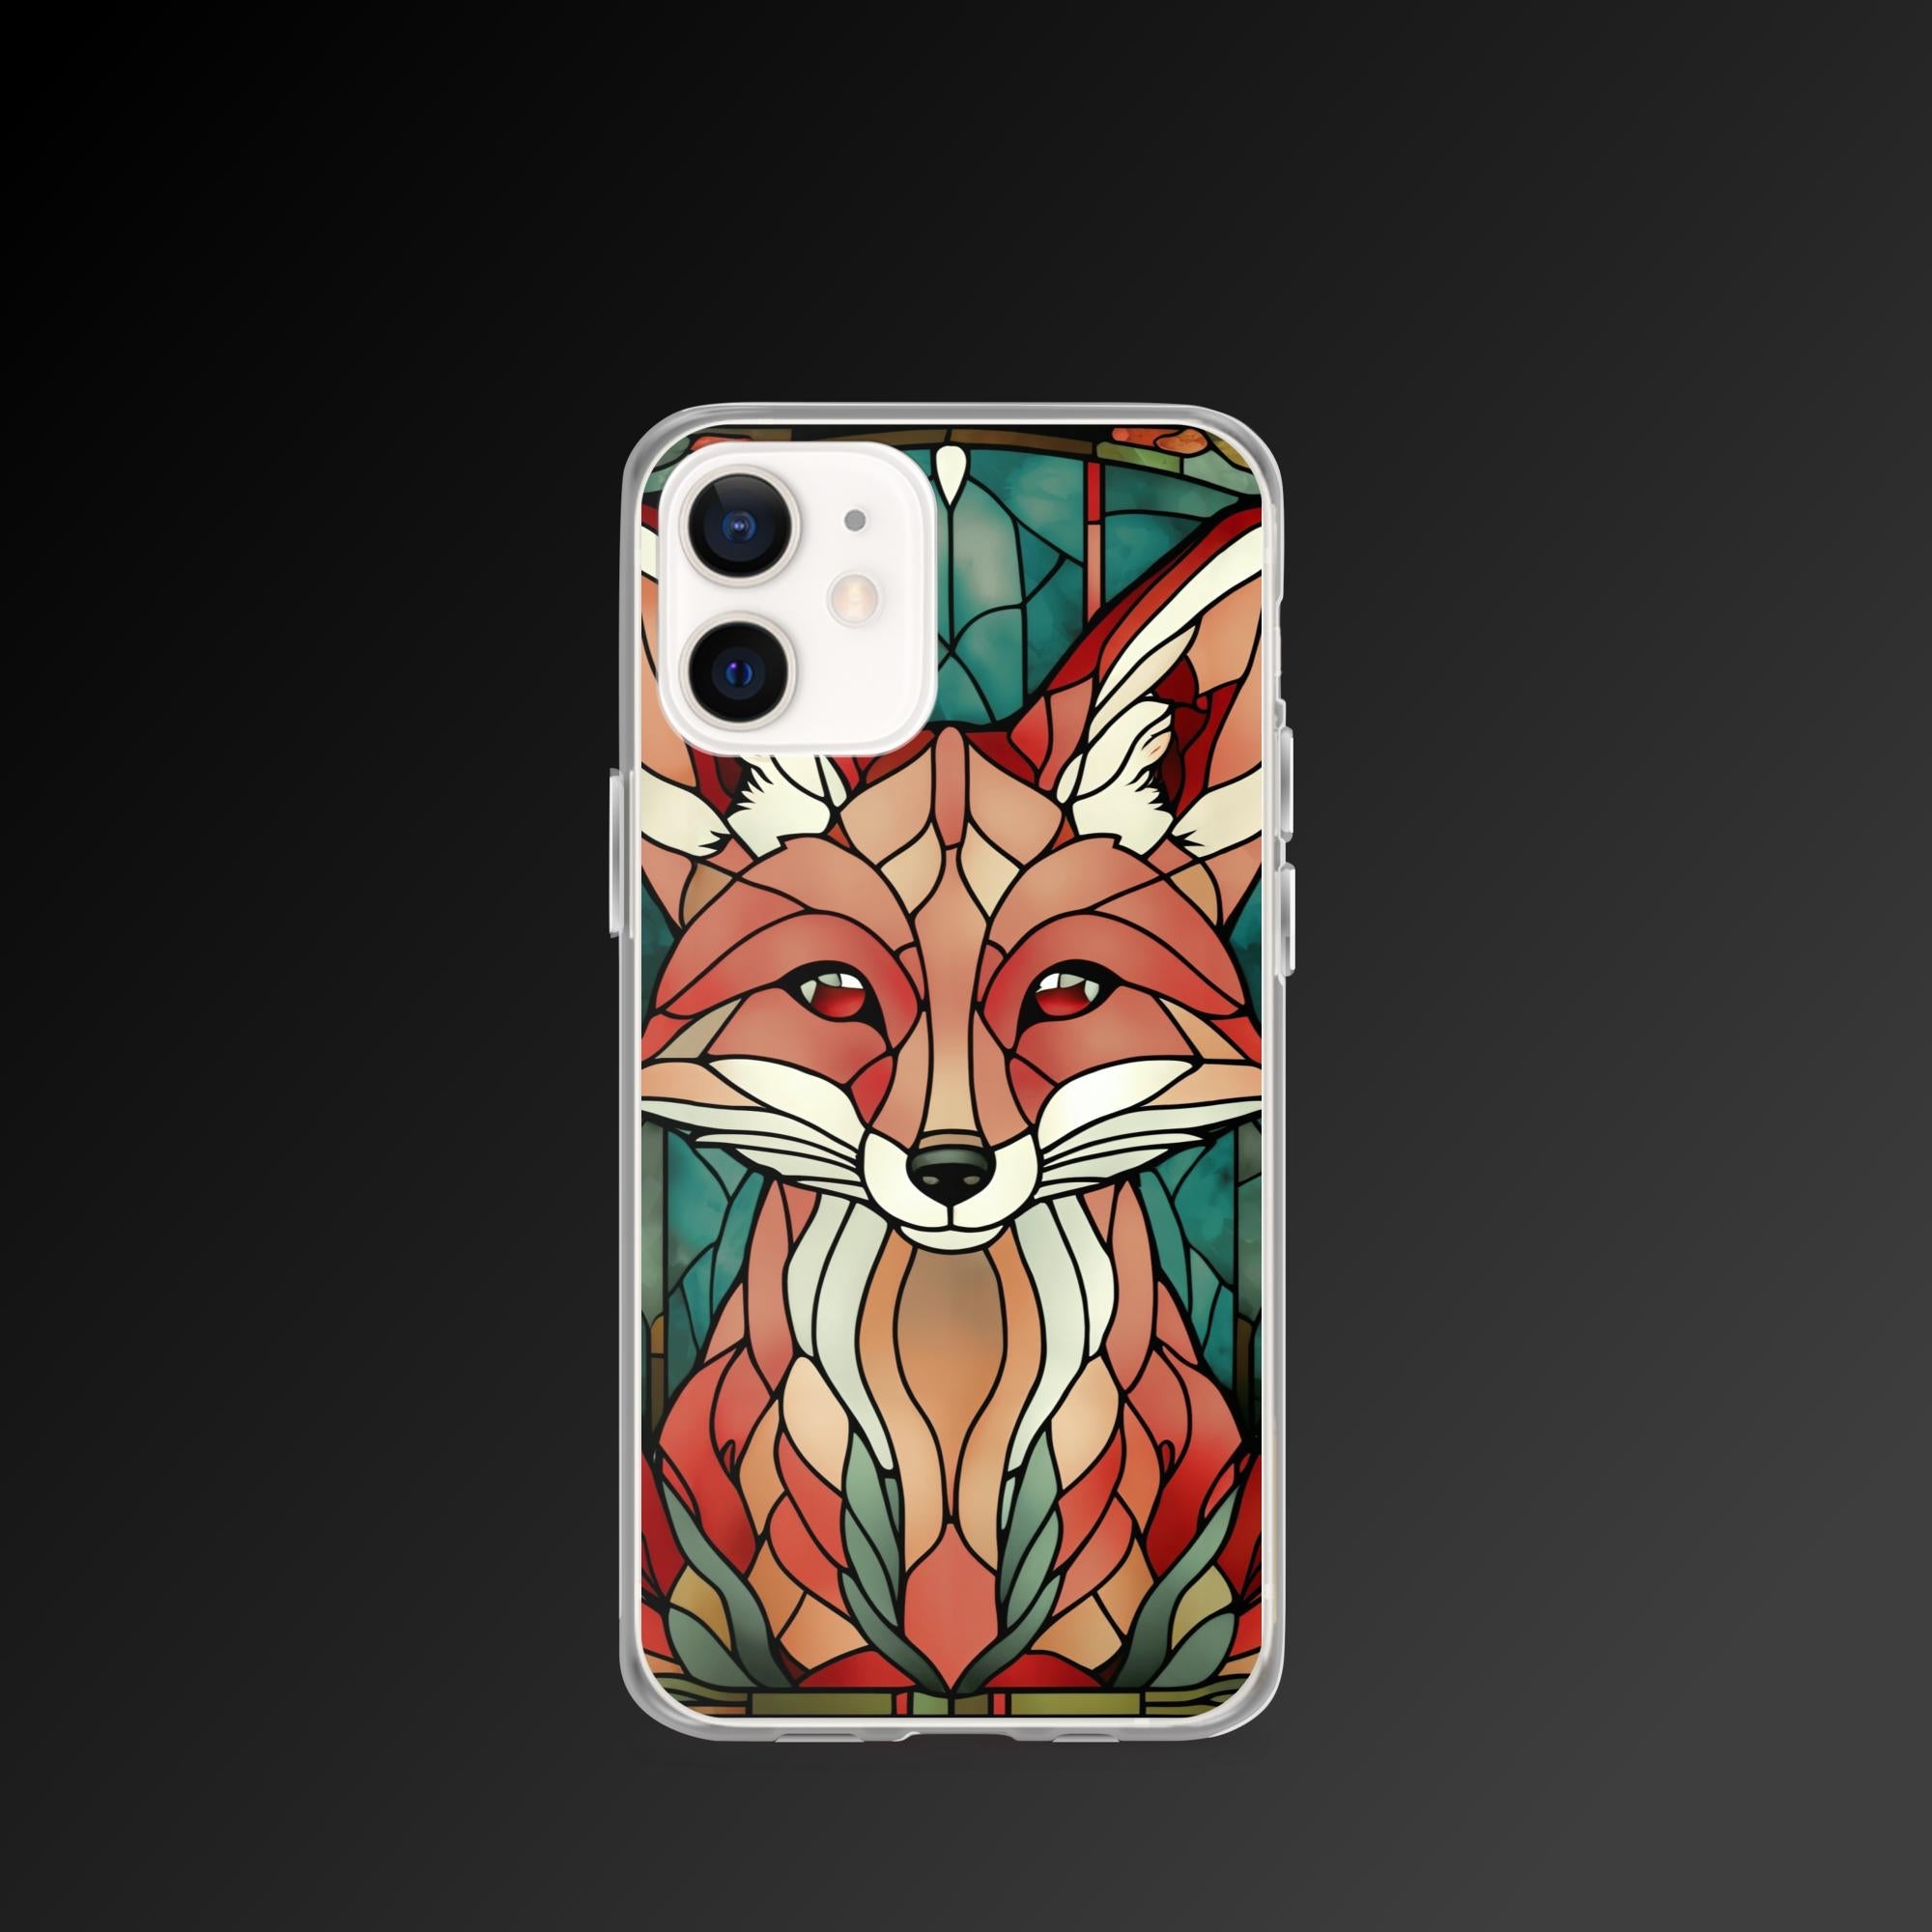 "Flaming fox" clear iphone case - Clear iphone case - Ever colorful